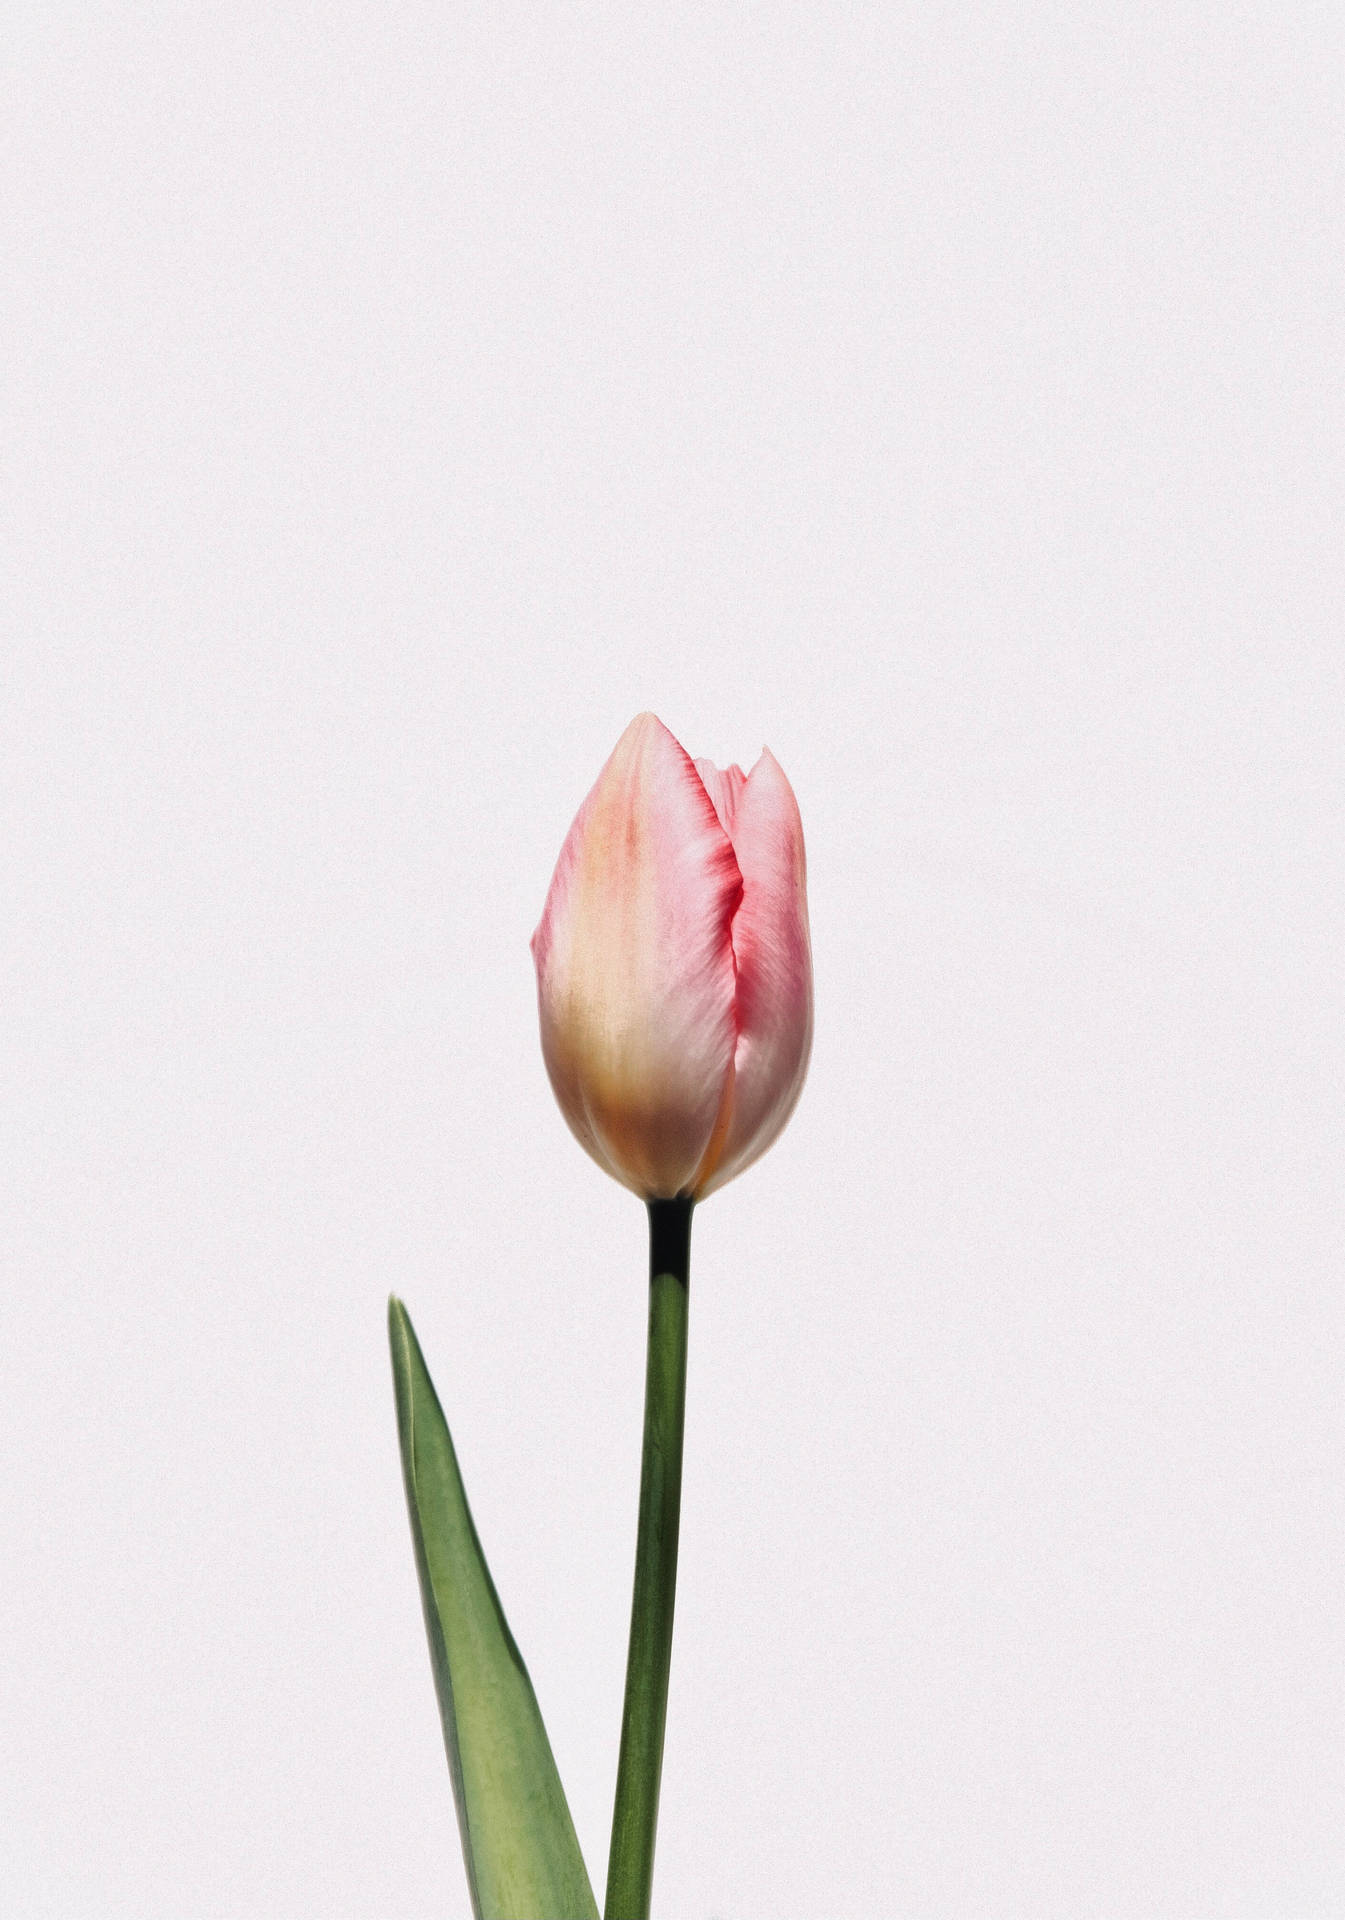 A pink tulip flower with a green stem and leaves against a white background - Tulip